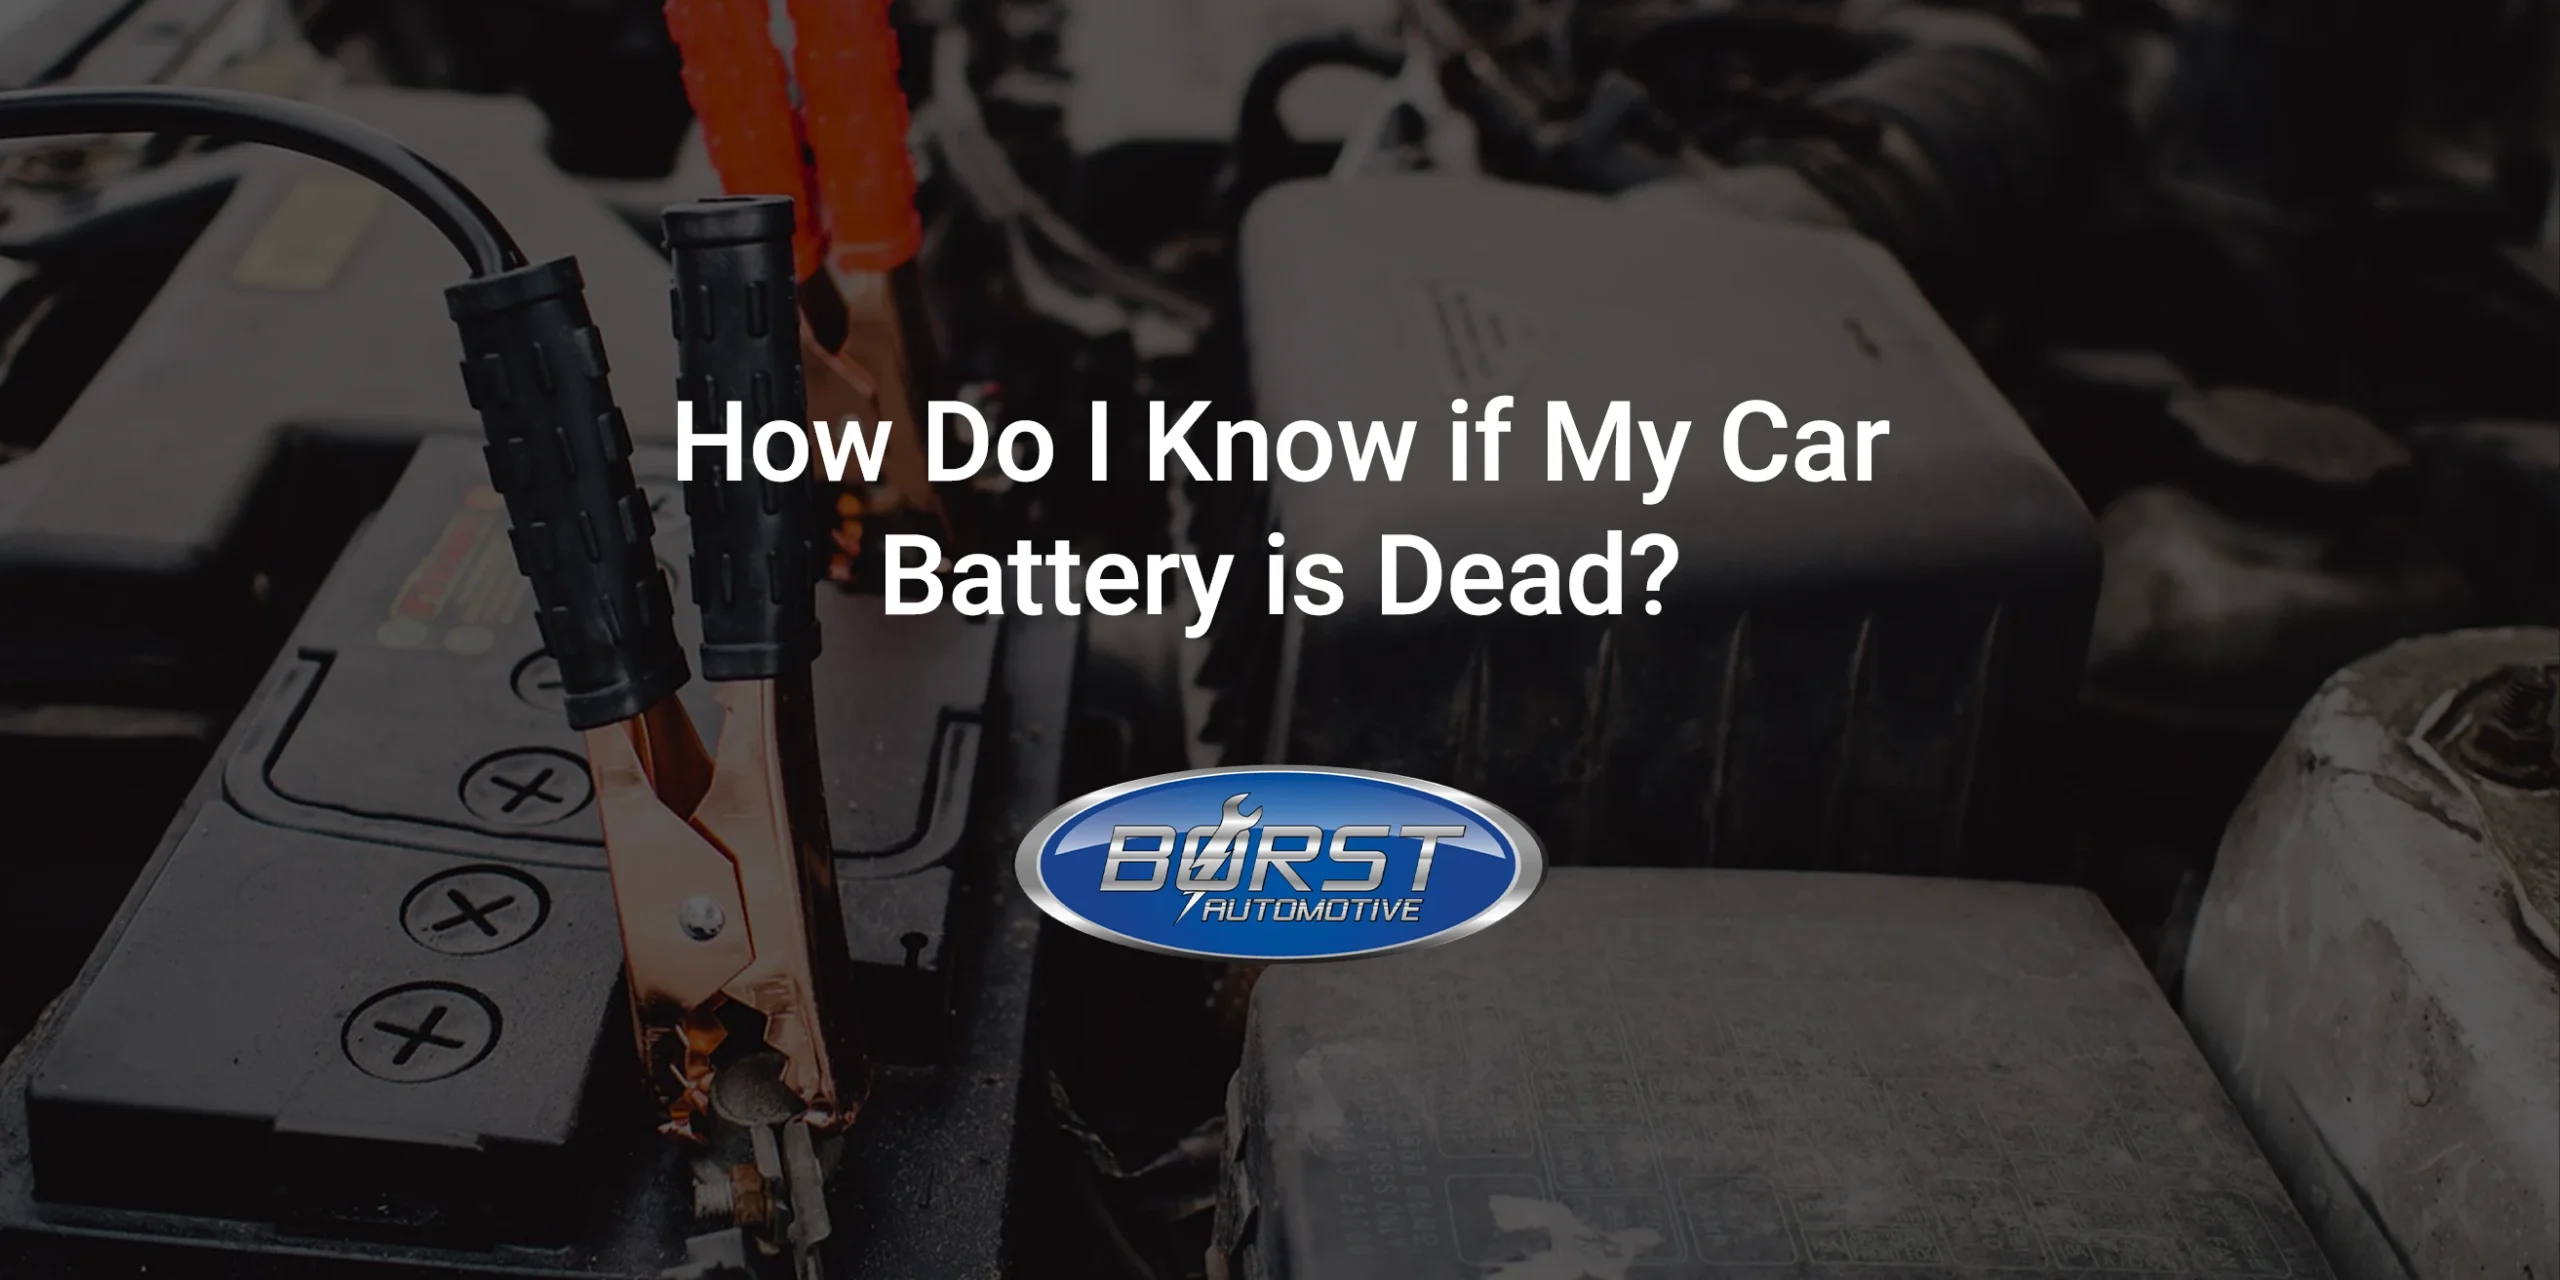 How Do I Know if My Car Battery is Dead?